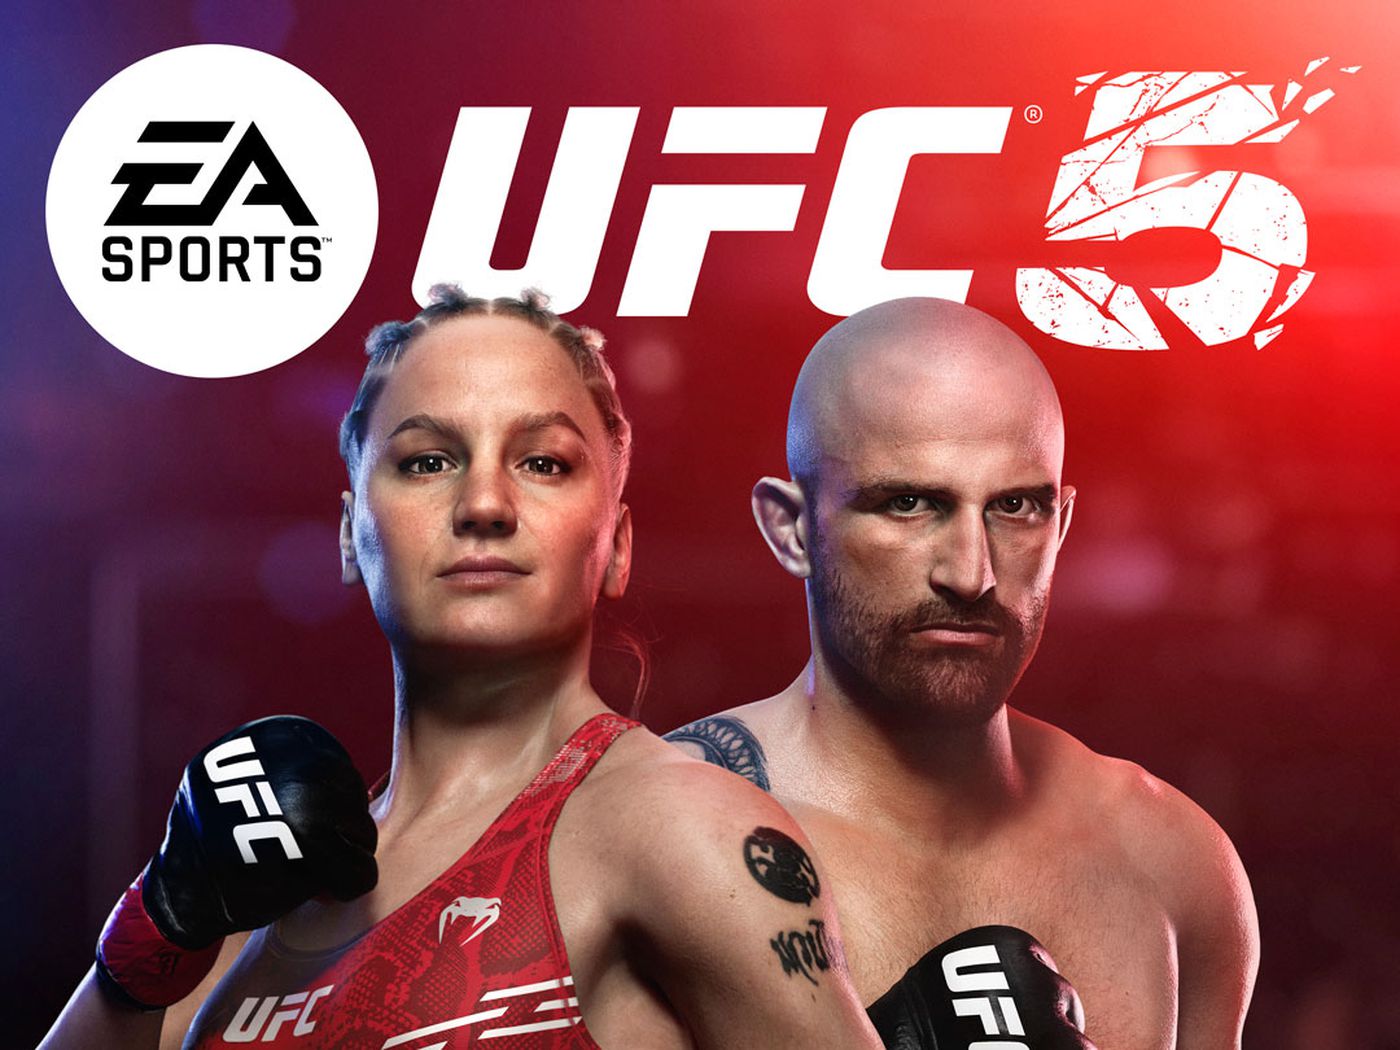 EA Sports proudly reveals UFC 5 cover athletes, immediately trashed by outraged MMA fans